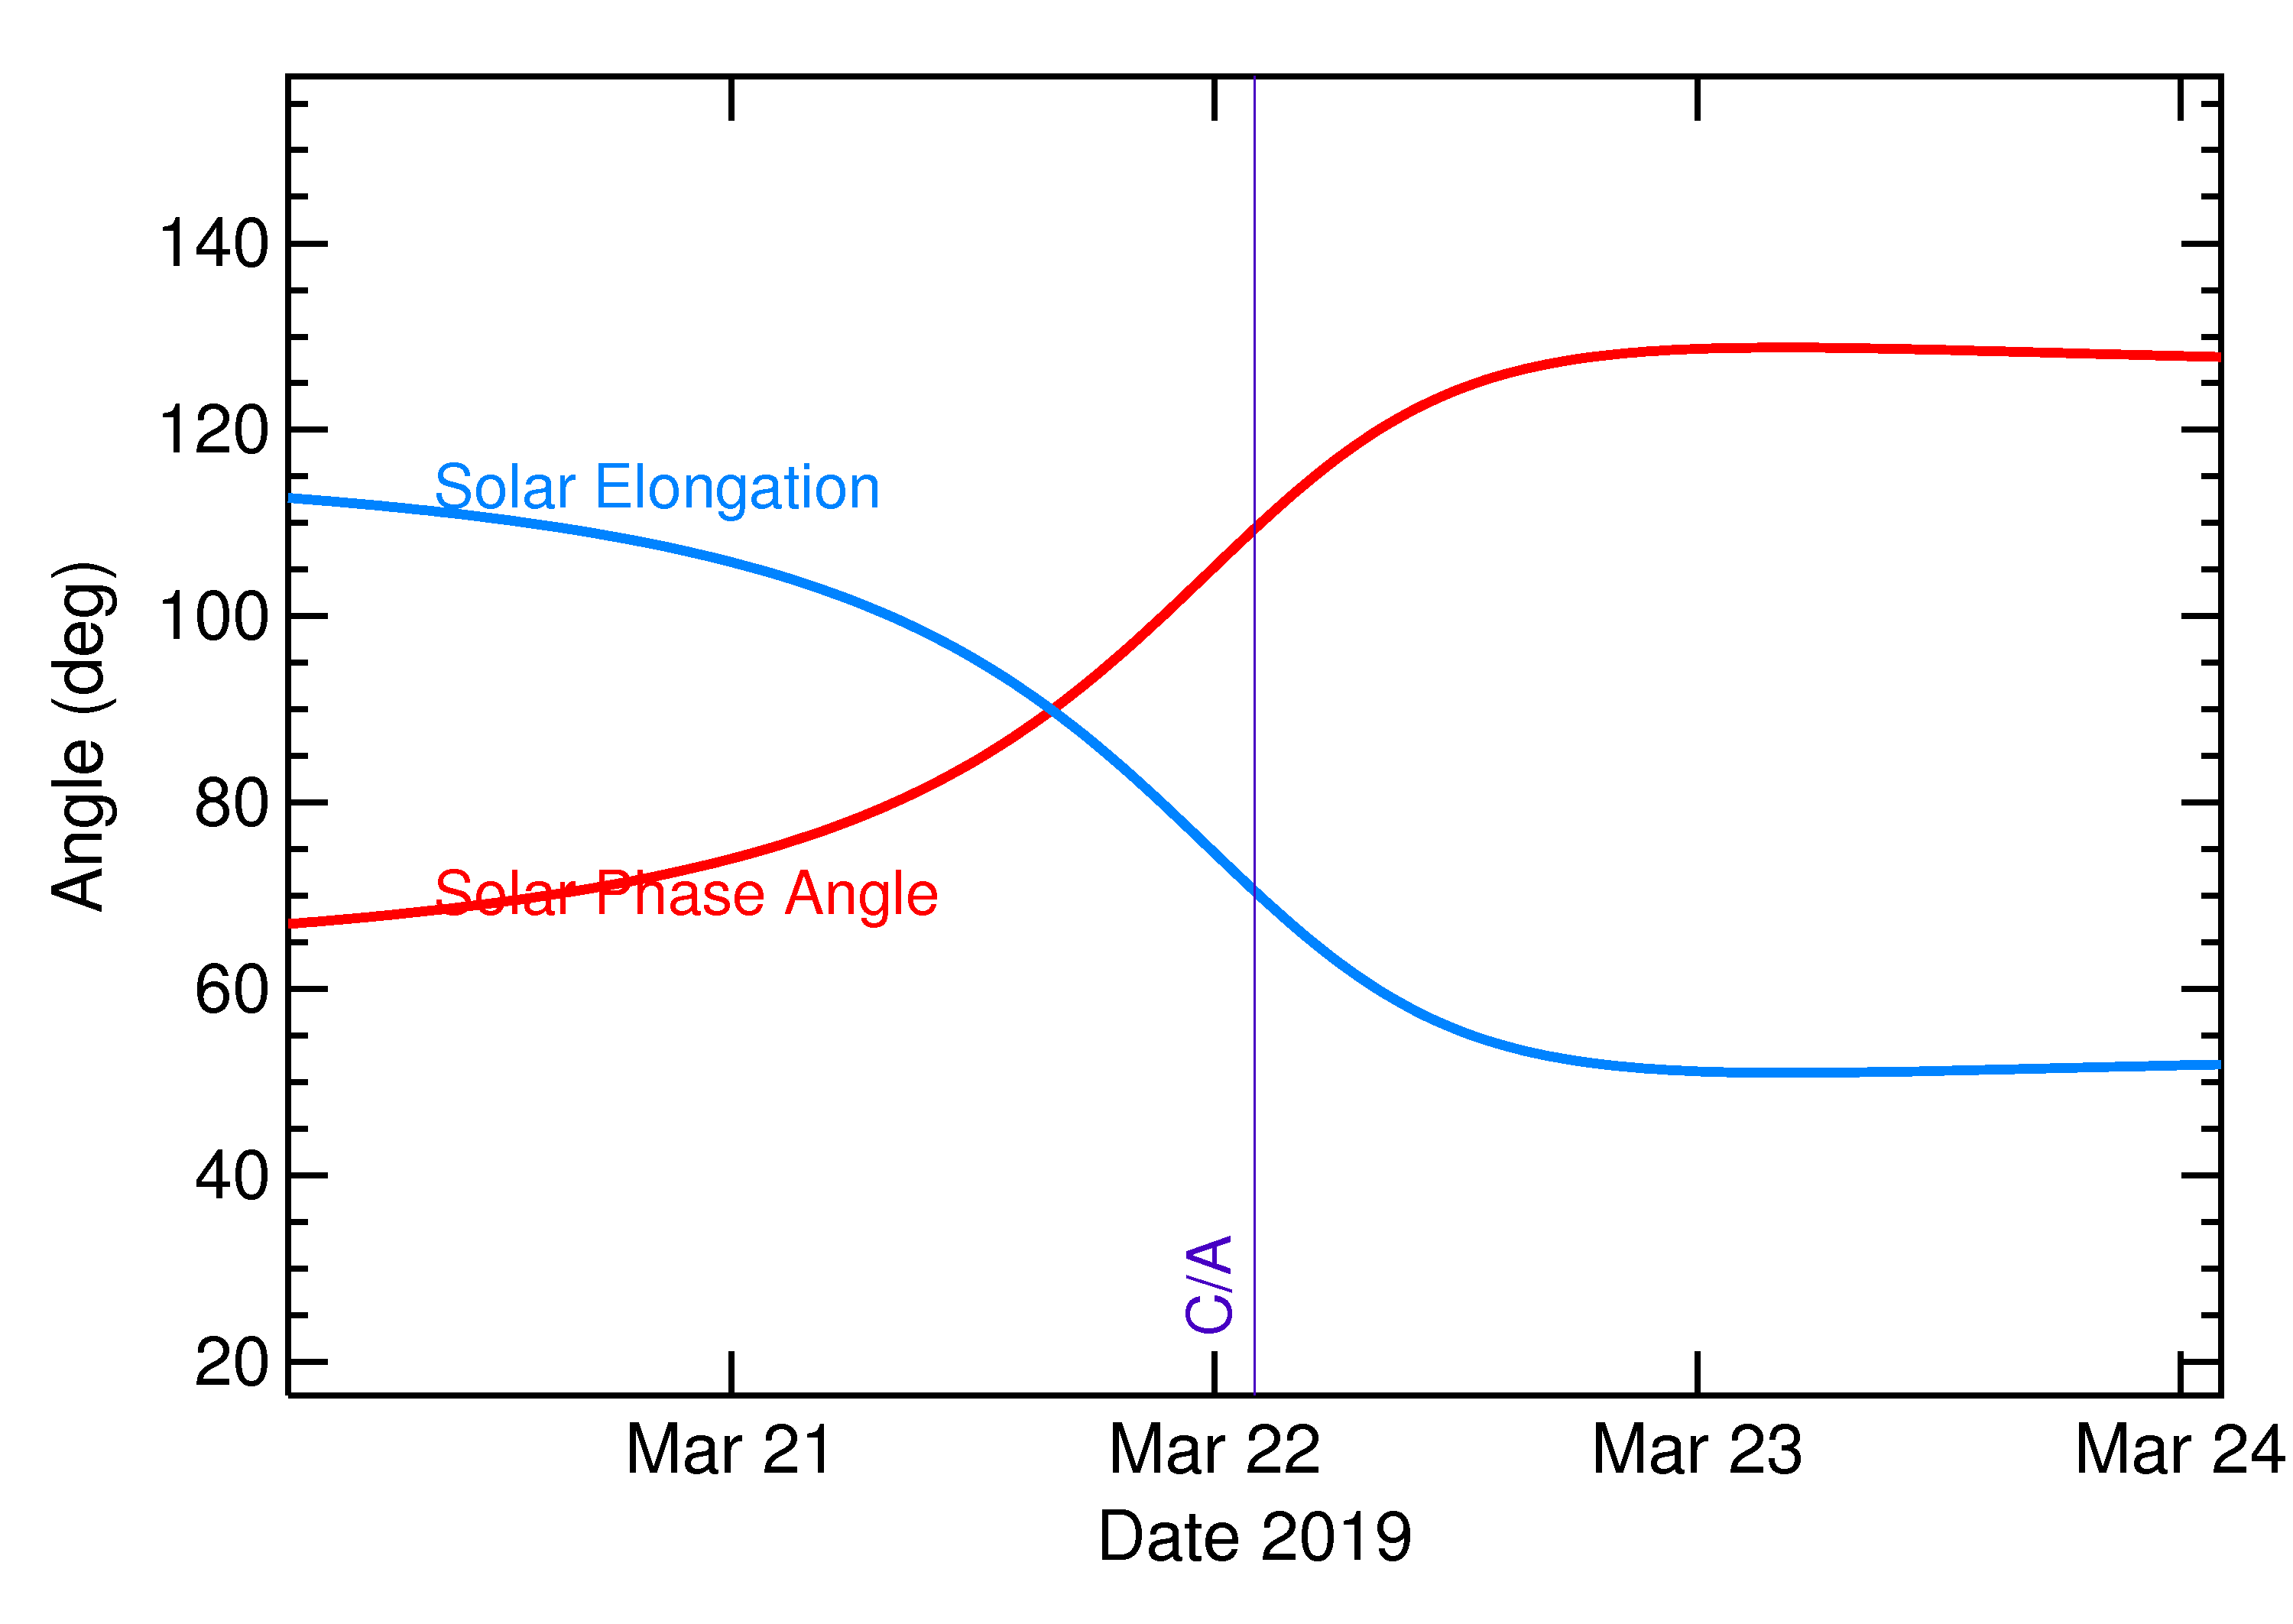 Solar Elongation and Solar Phase Angle of 2019 EA2 in the days around closest approach